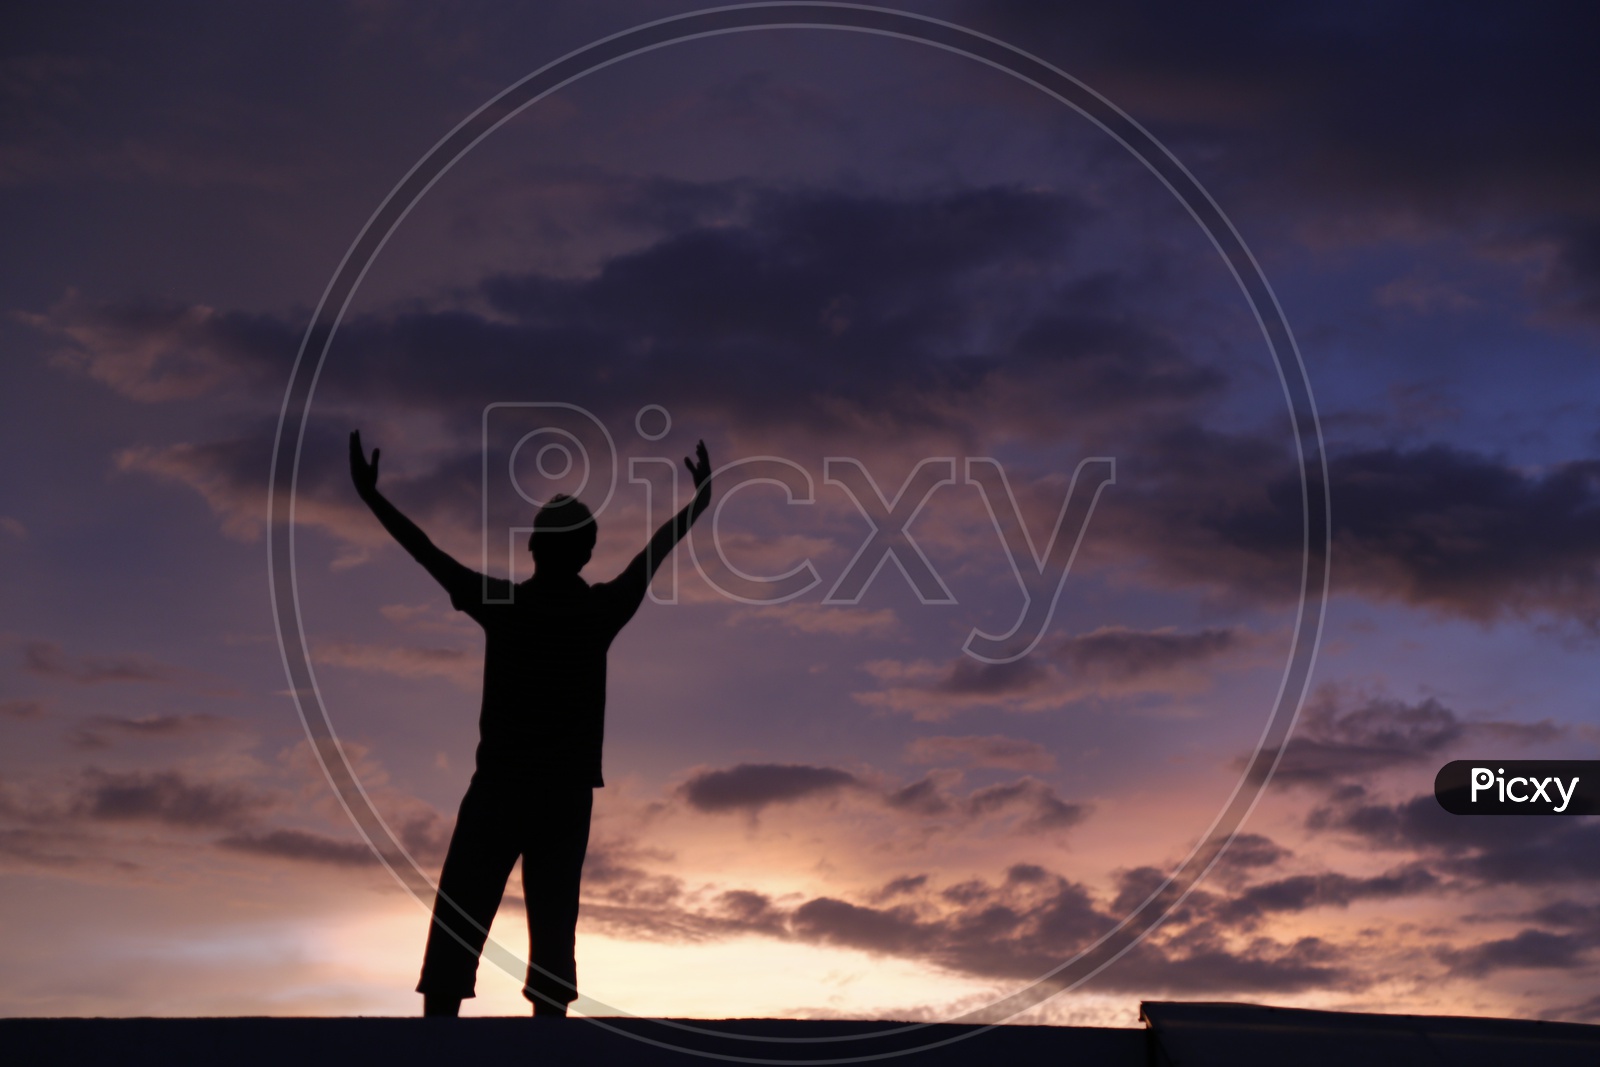 Silhouette Of a  Young man Over a Sunset Sky